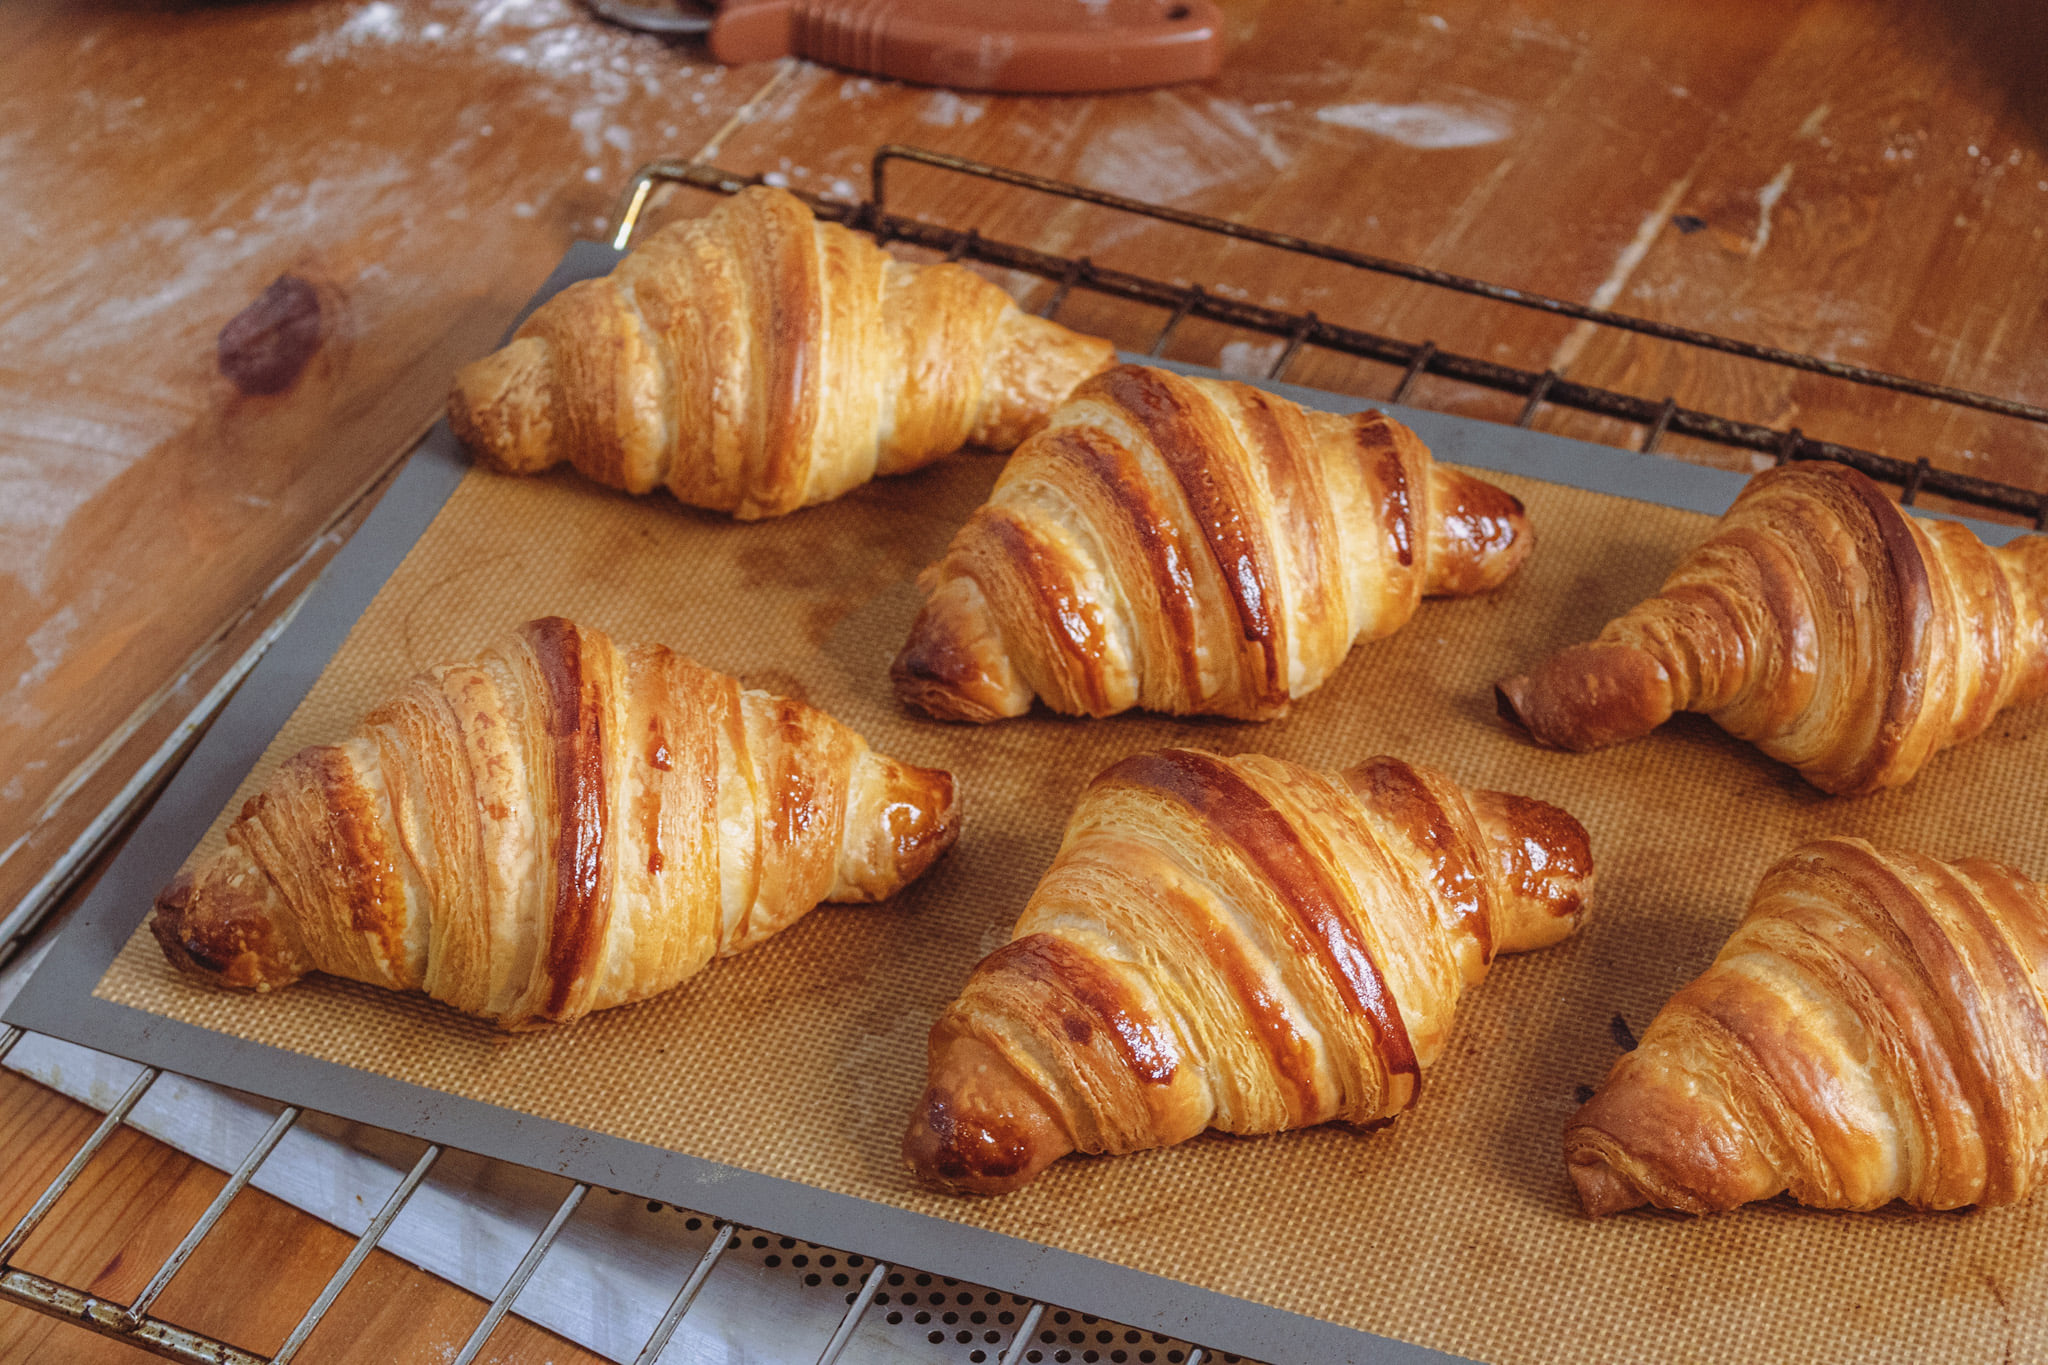  TRY My third attempt at croissants ricette ricette ad in italiane 